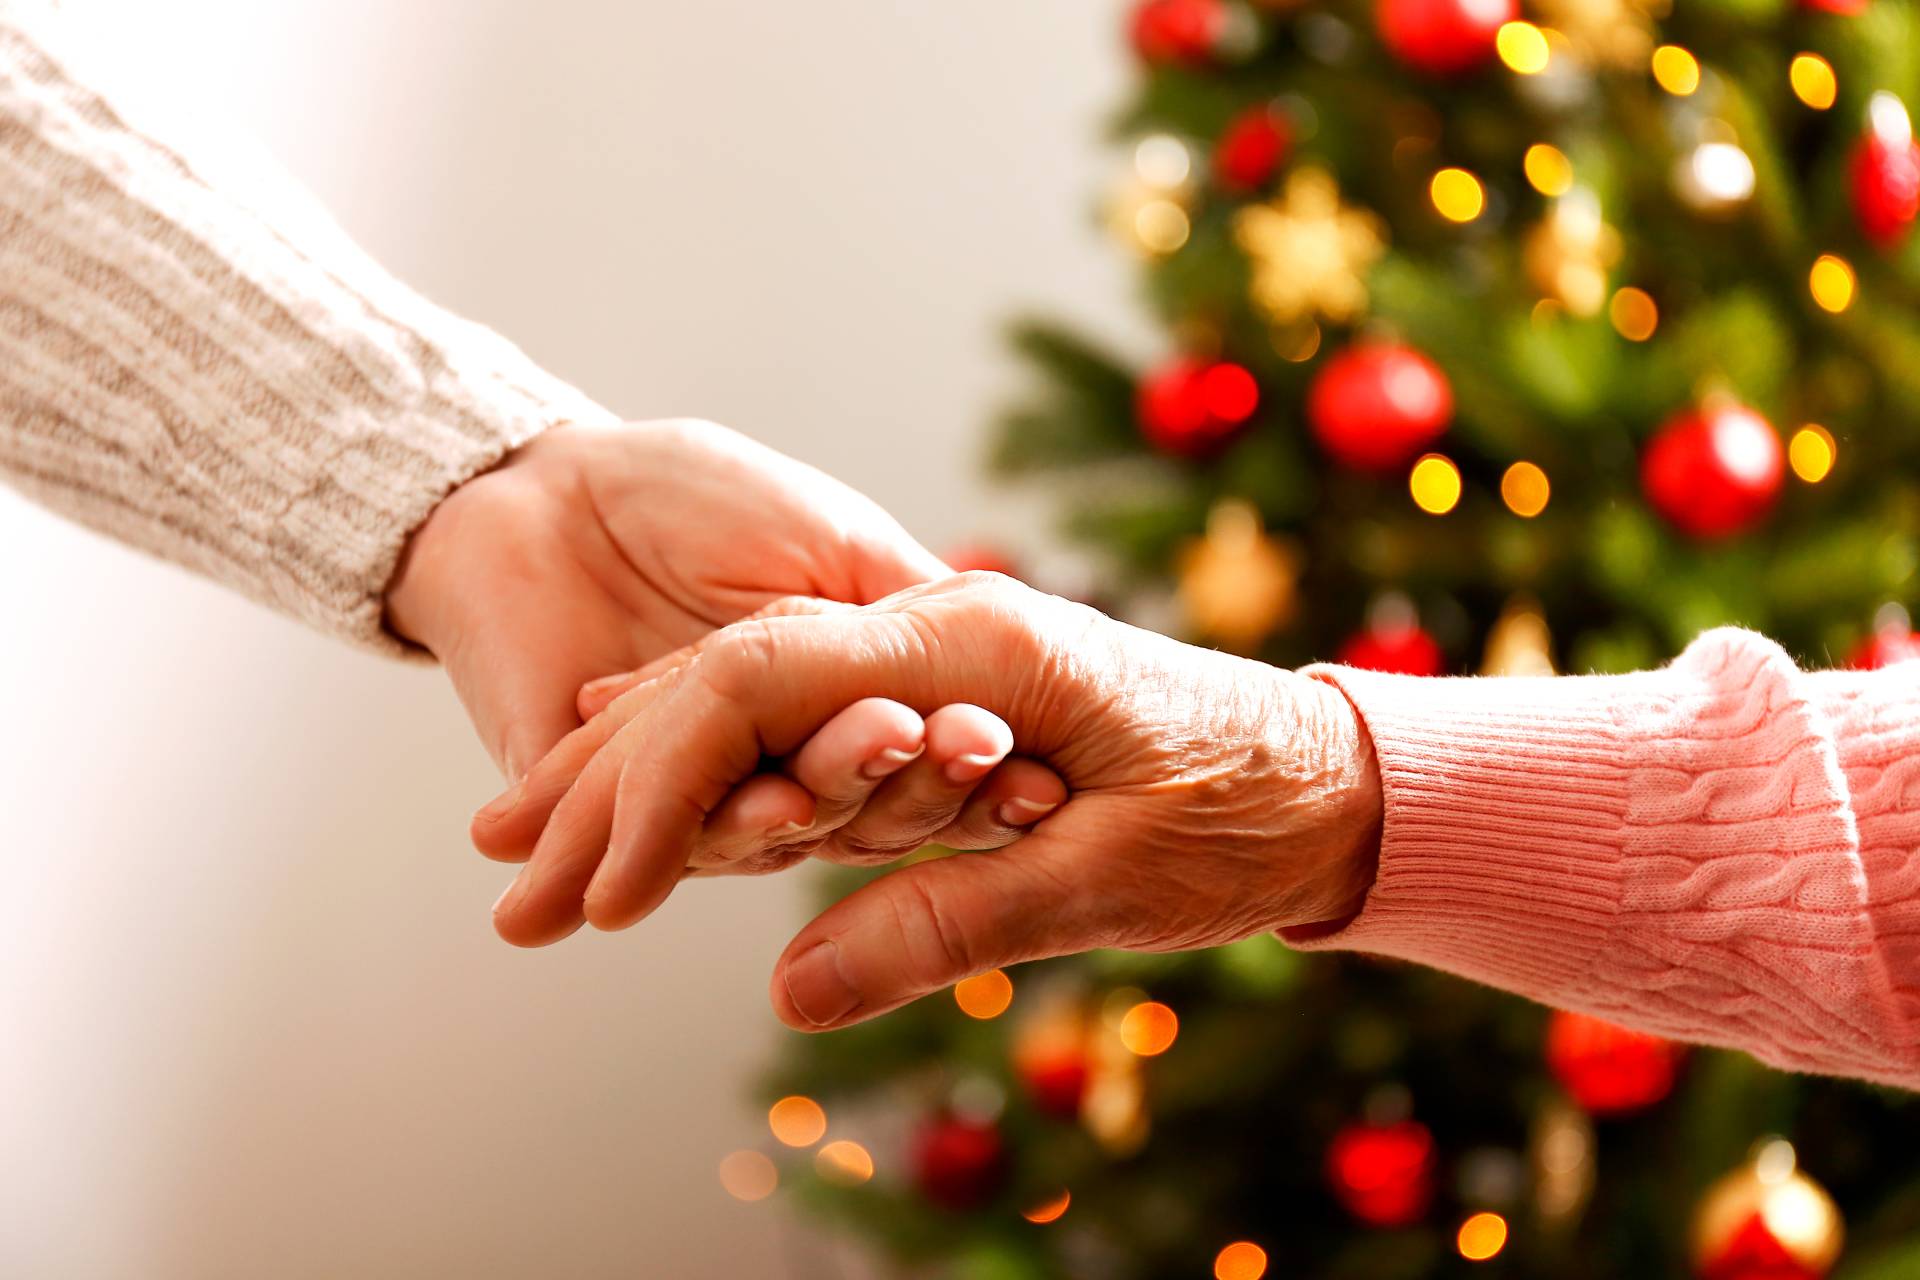 A young person holding an elderly persons hand with a Christmas tree sparkling in the background.